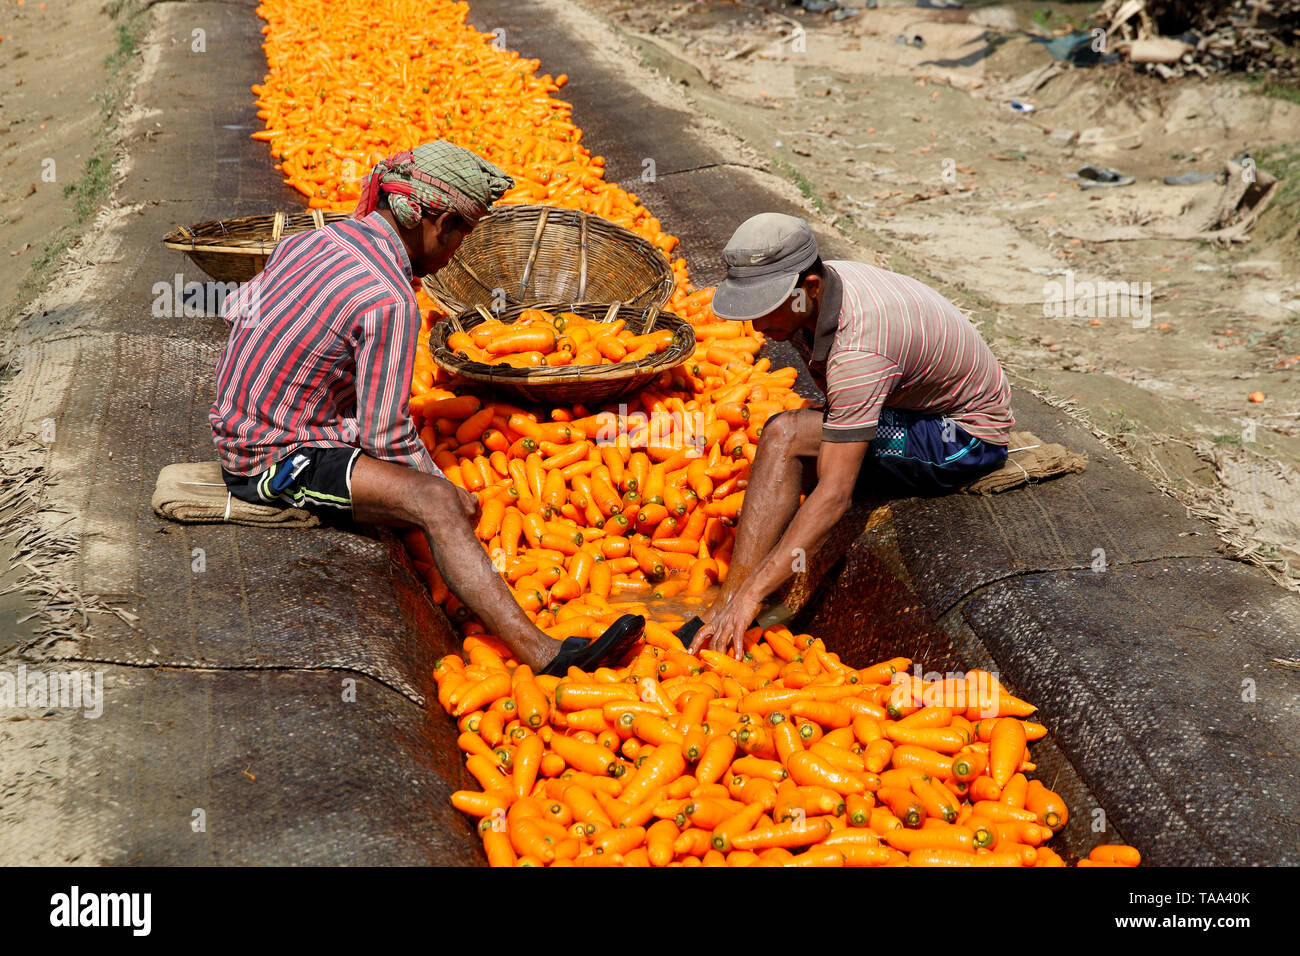 Washing carrots after harvesting from the field. Manikganj, Bangladesh Stock Photo